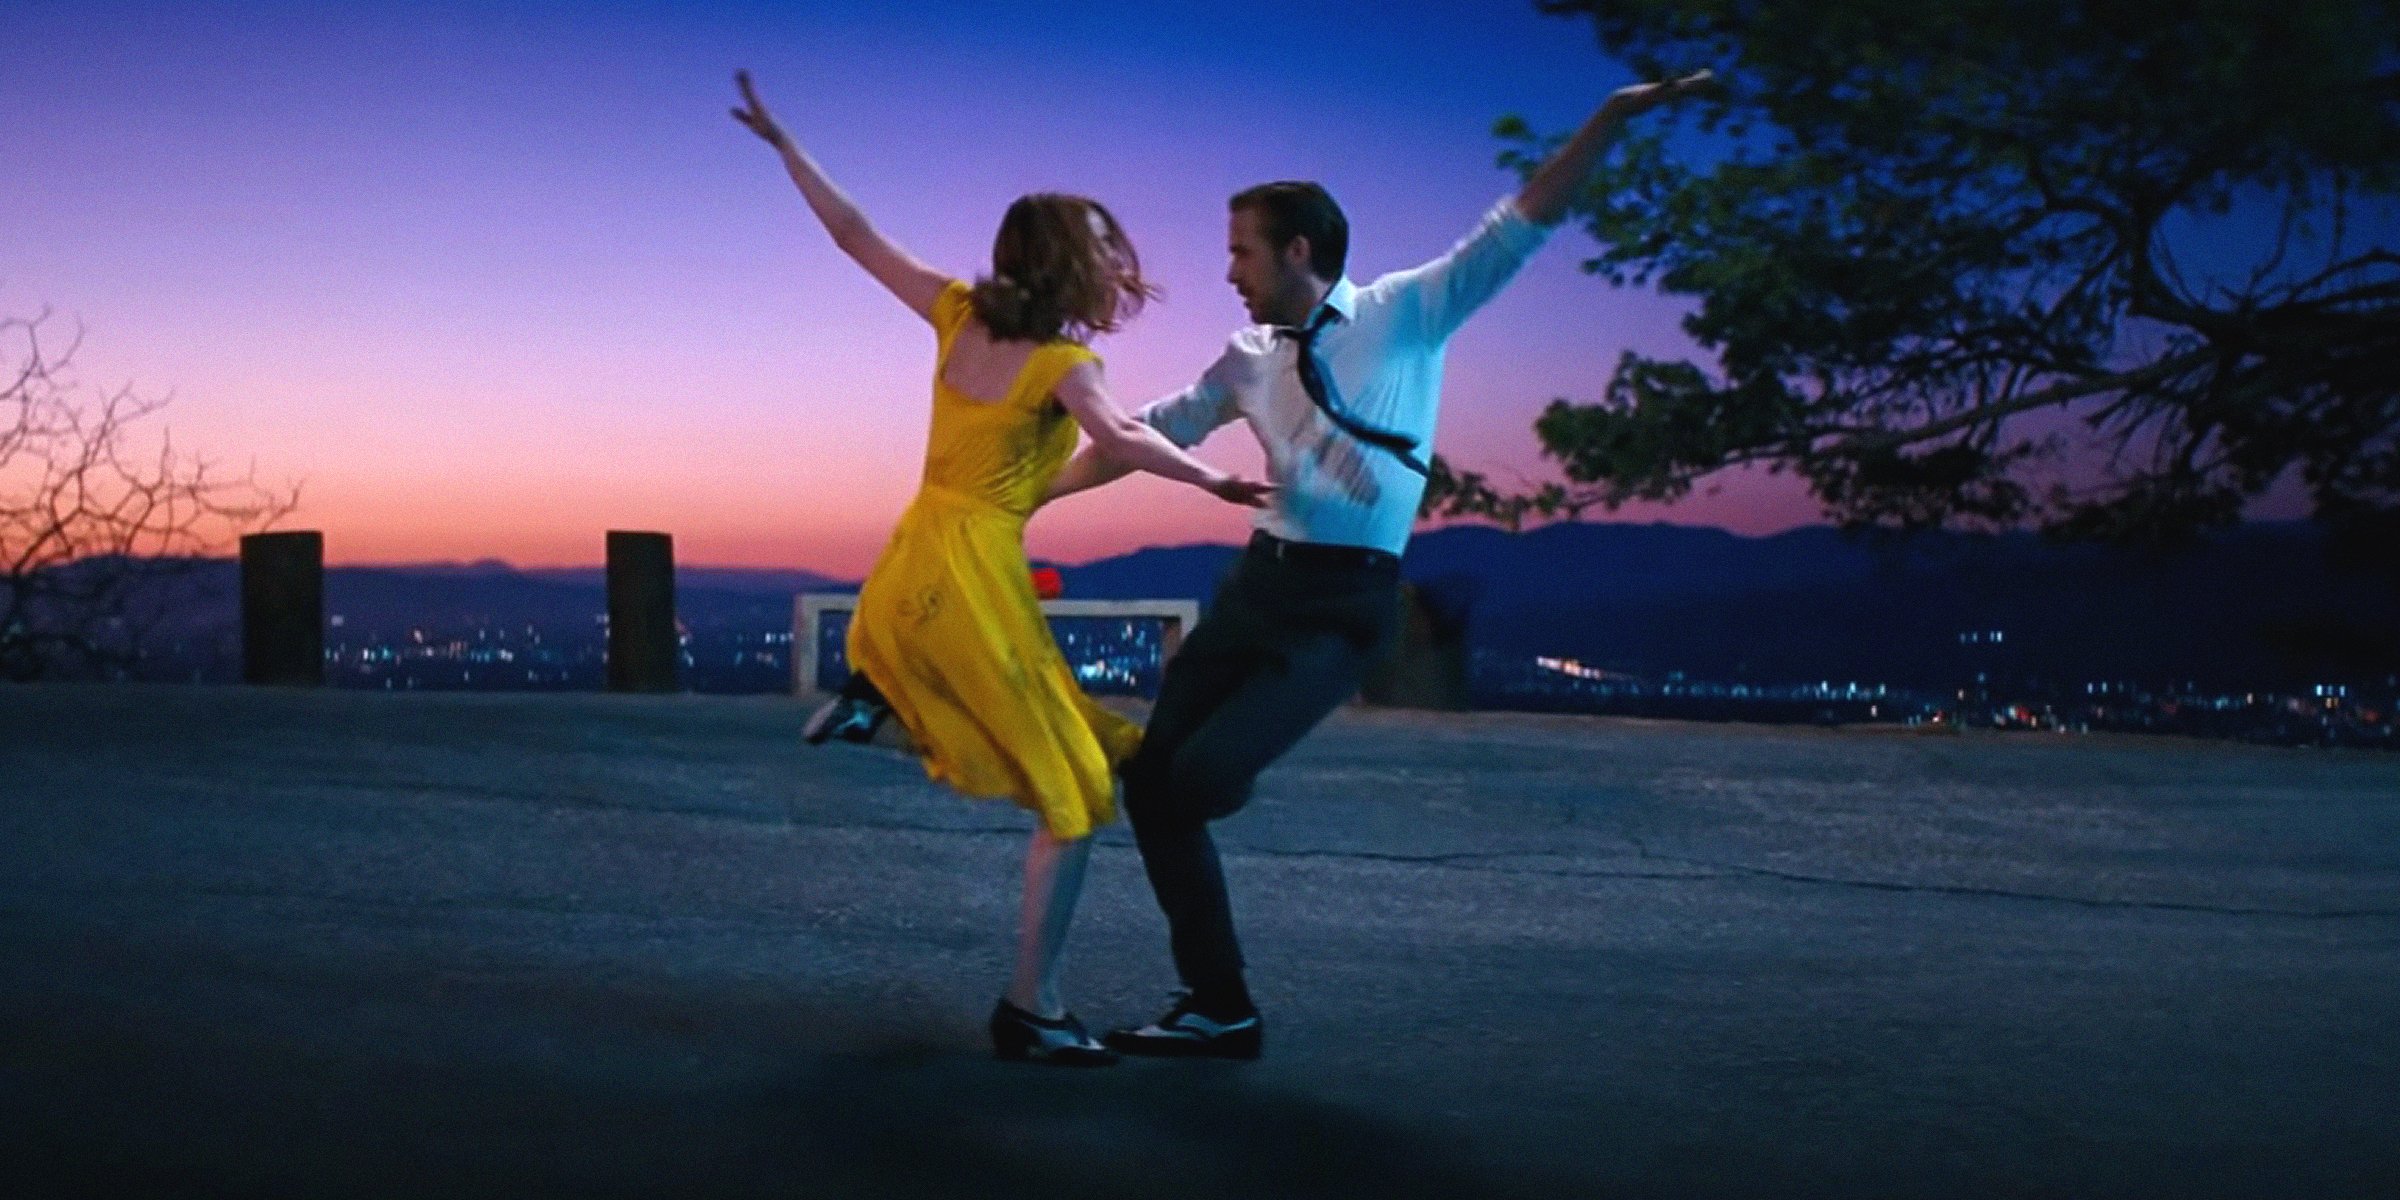 Characters Mia Dolan and Sebastian Wilder from "La La Land" dancing together. | Source: youtube.com/YouTube Movies